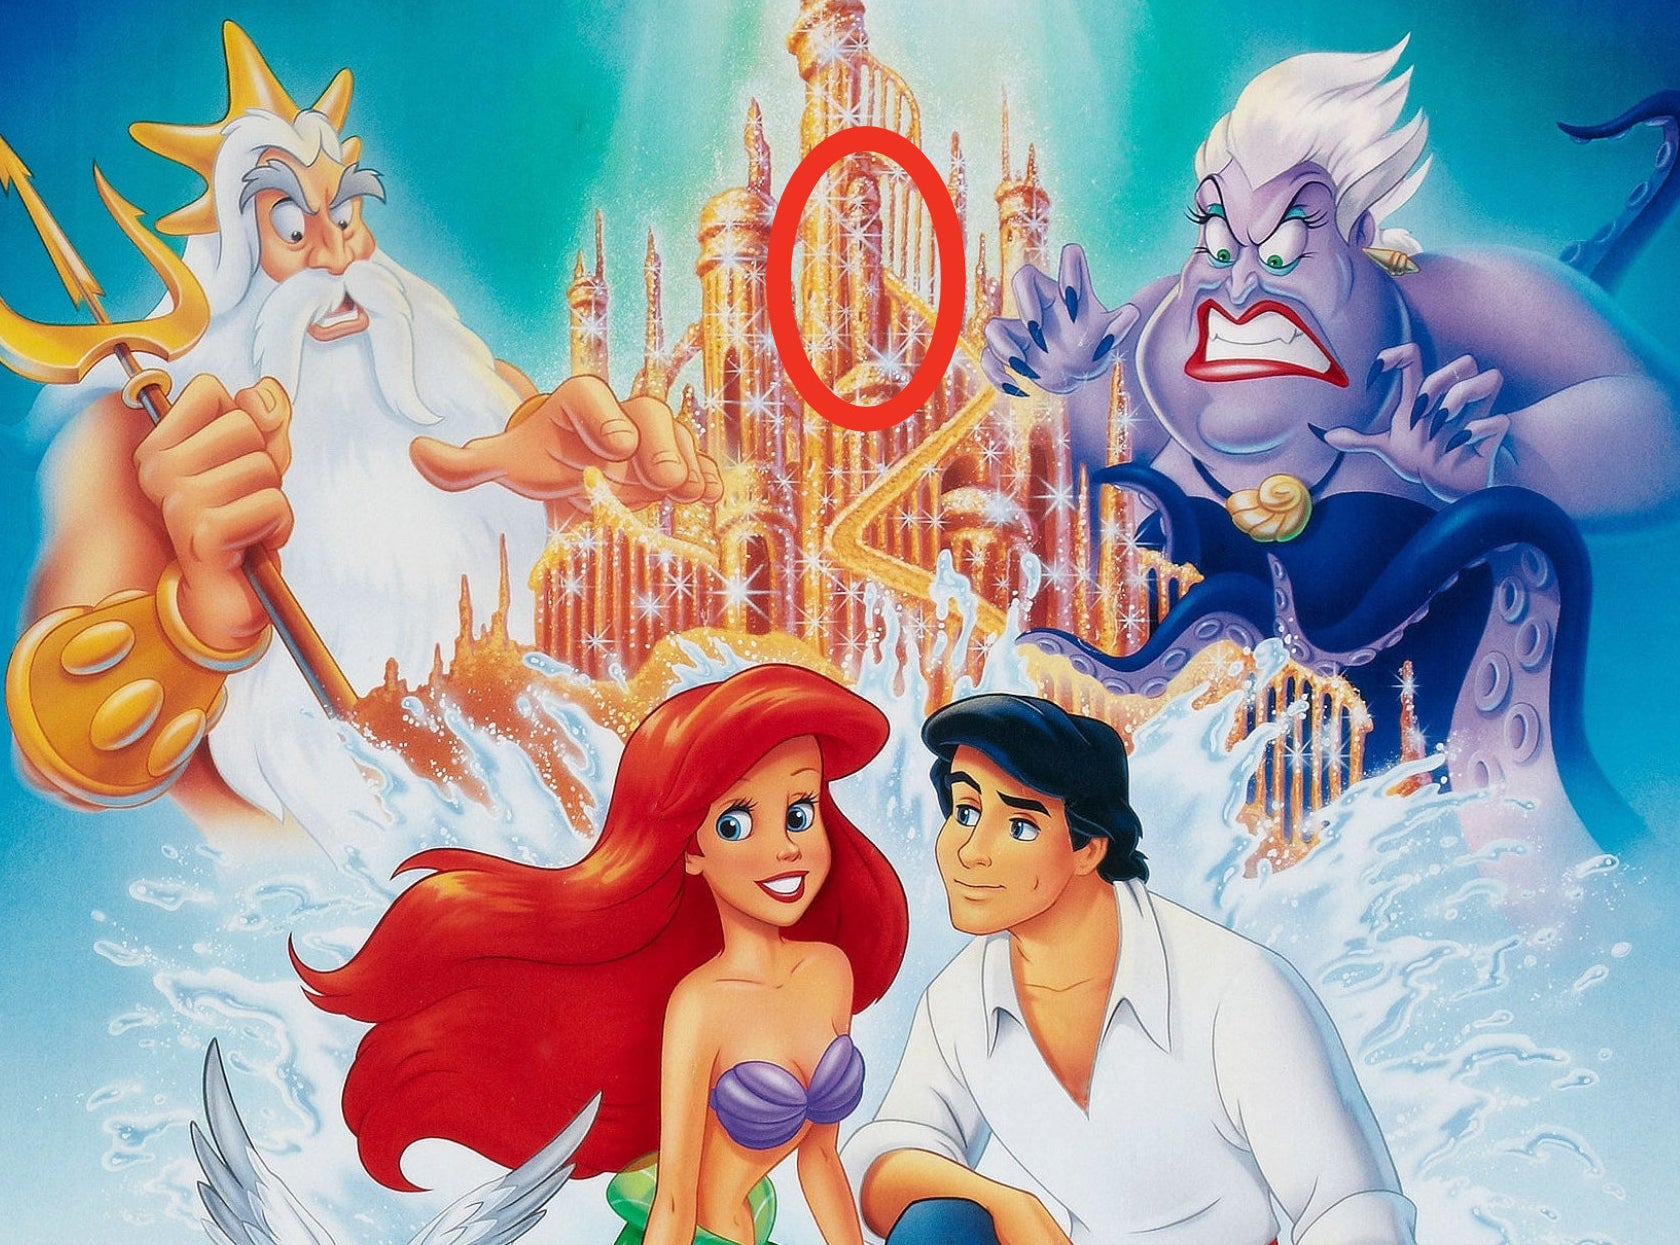 Poster for the little mermaid with a phallic-looking block of the castle circled